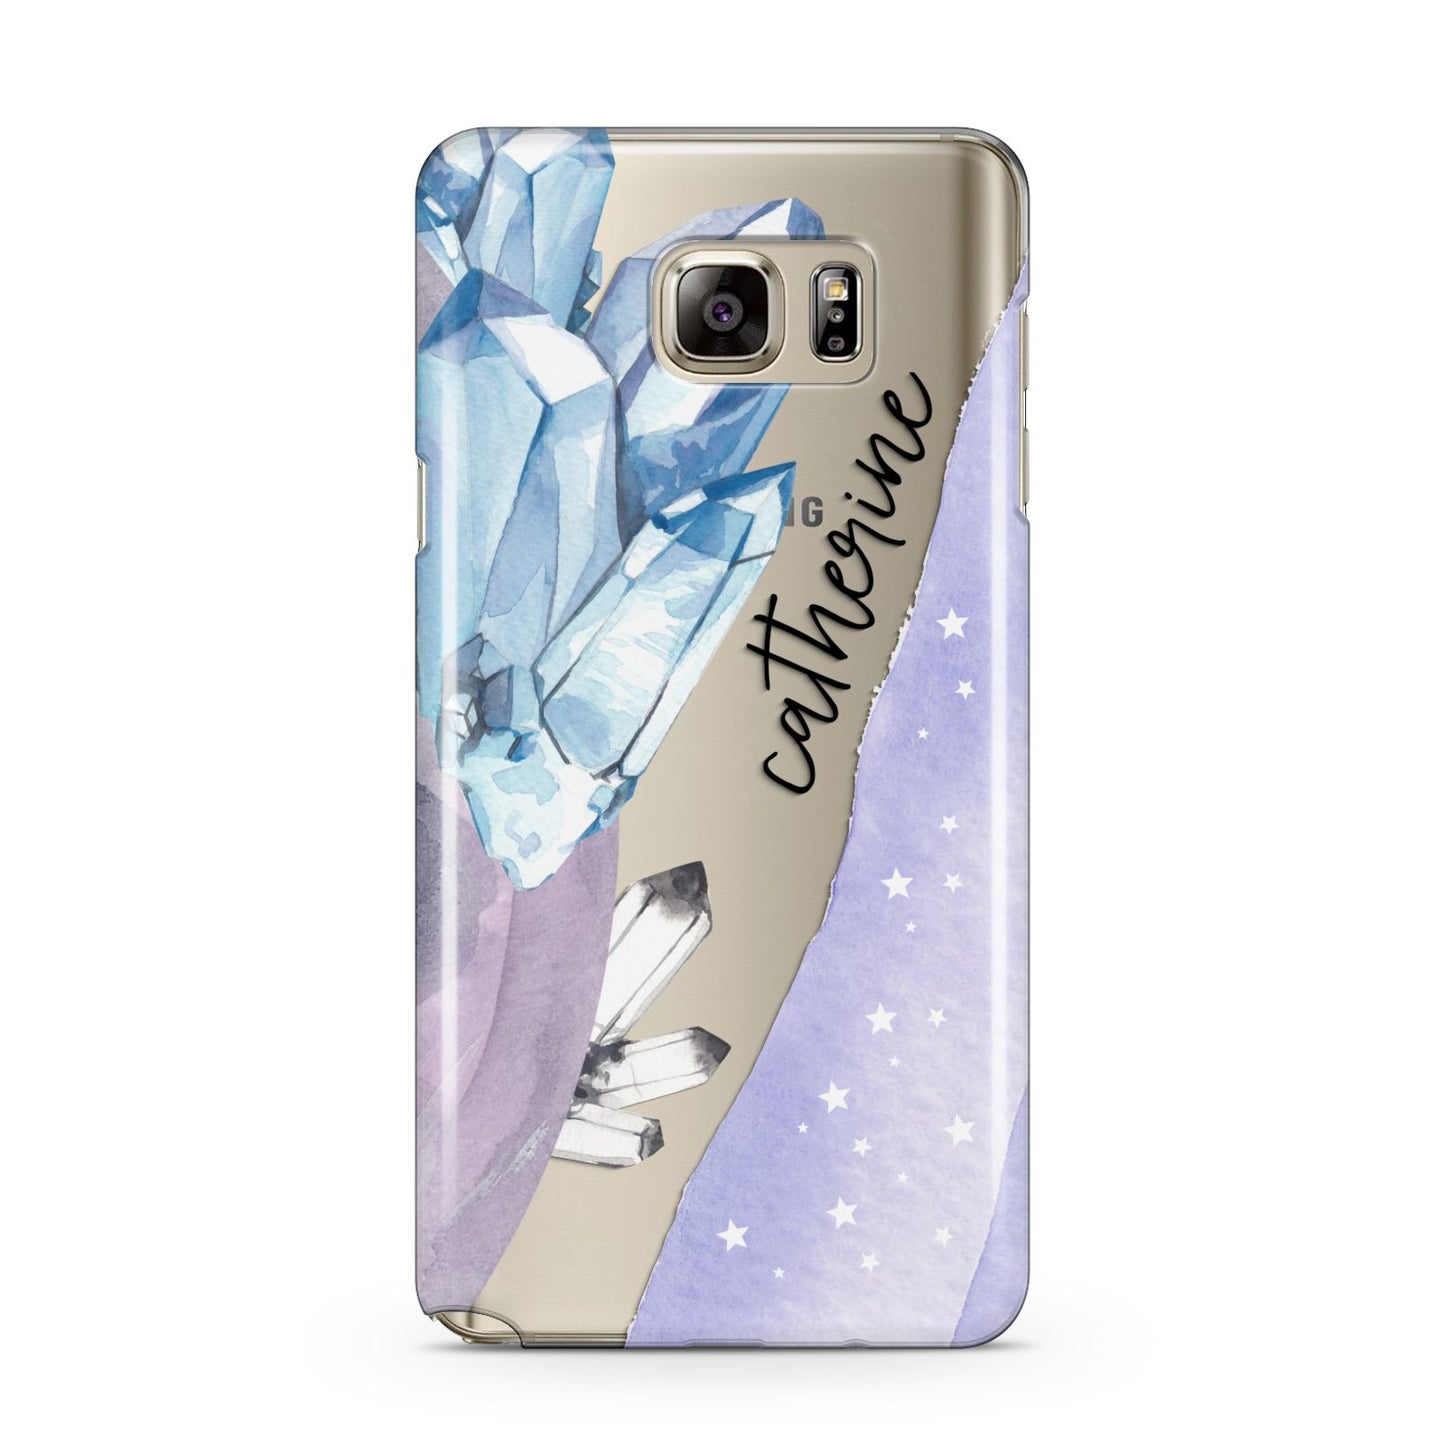 Crystals Personalised Name Samsung Galaxy Note 5 Case